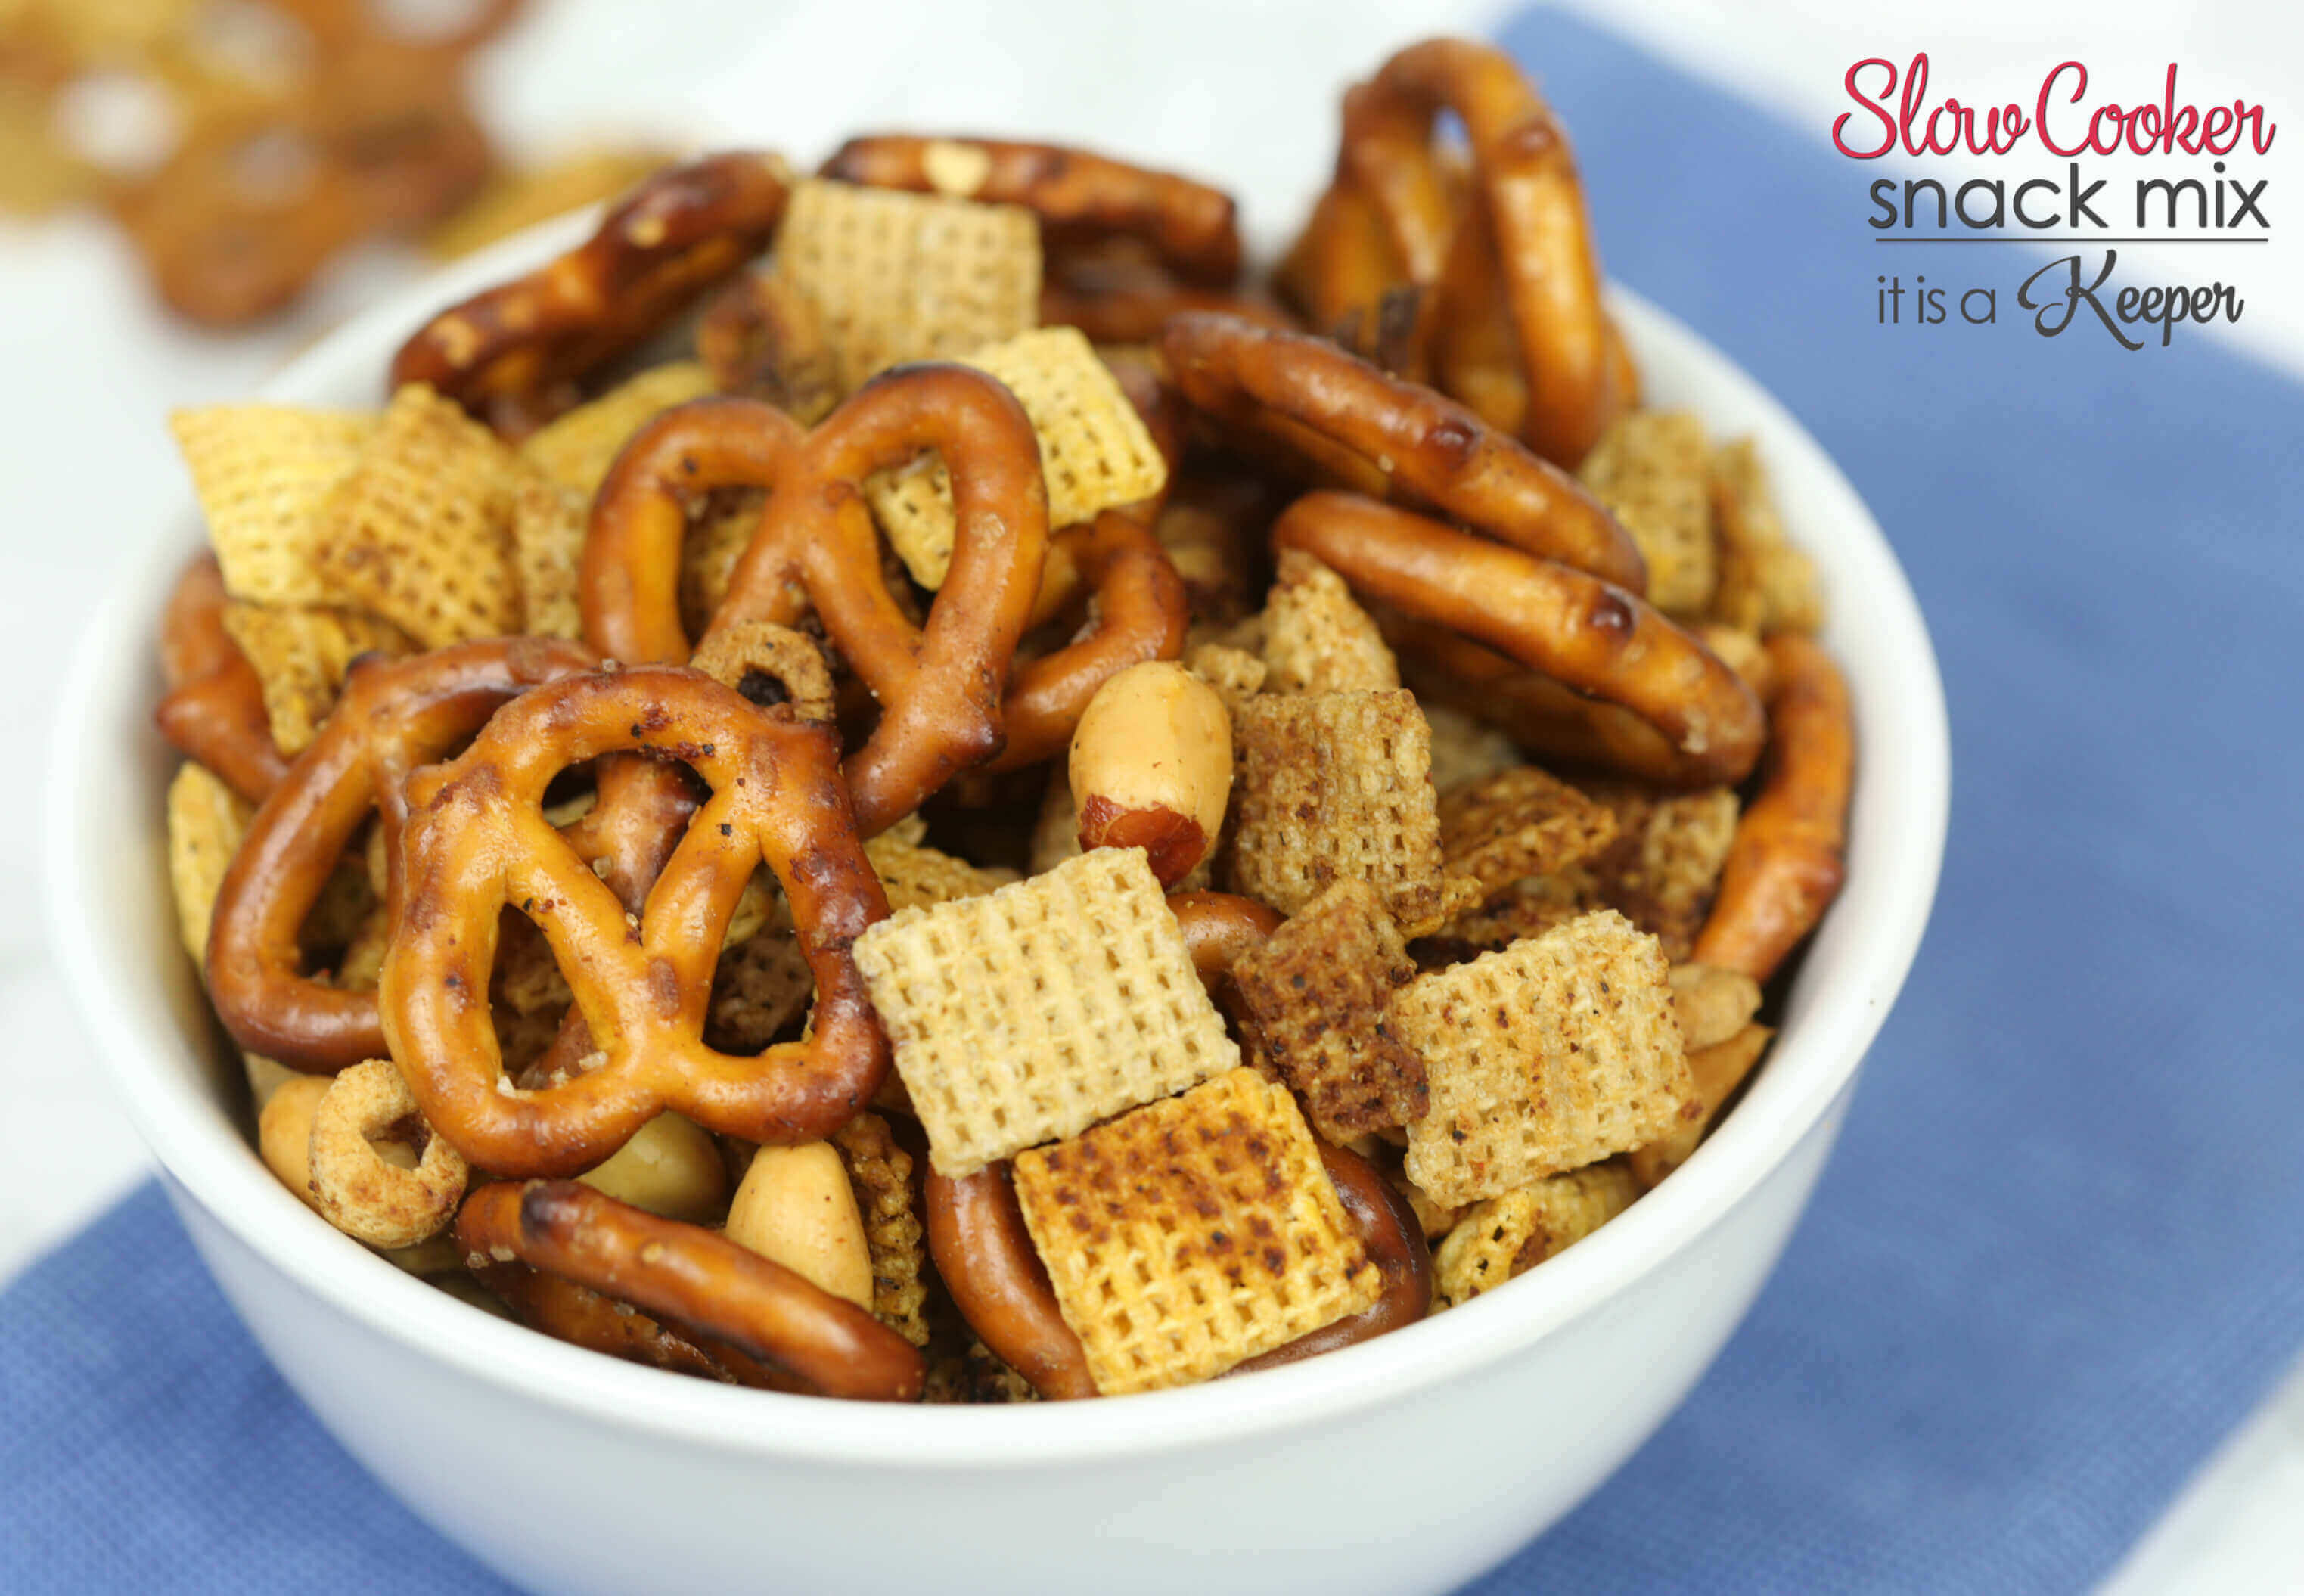 This Slow Cooker Party Snack Mix is one of my favorite easy Crock-Pot® slow cooker recipes. It's super delicious and one of the best slow cooker recipes of all time.